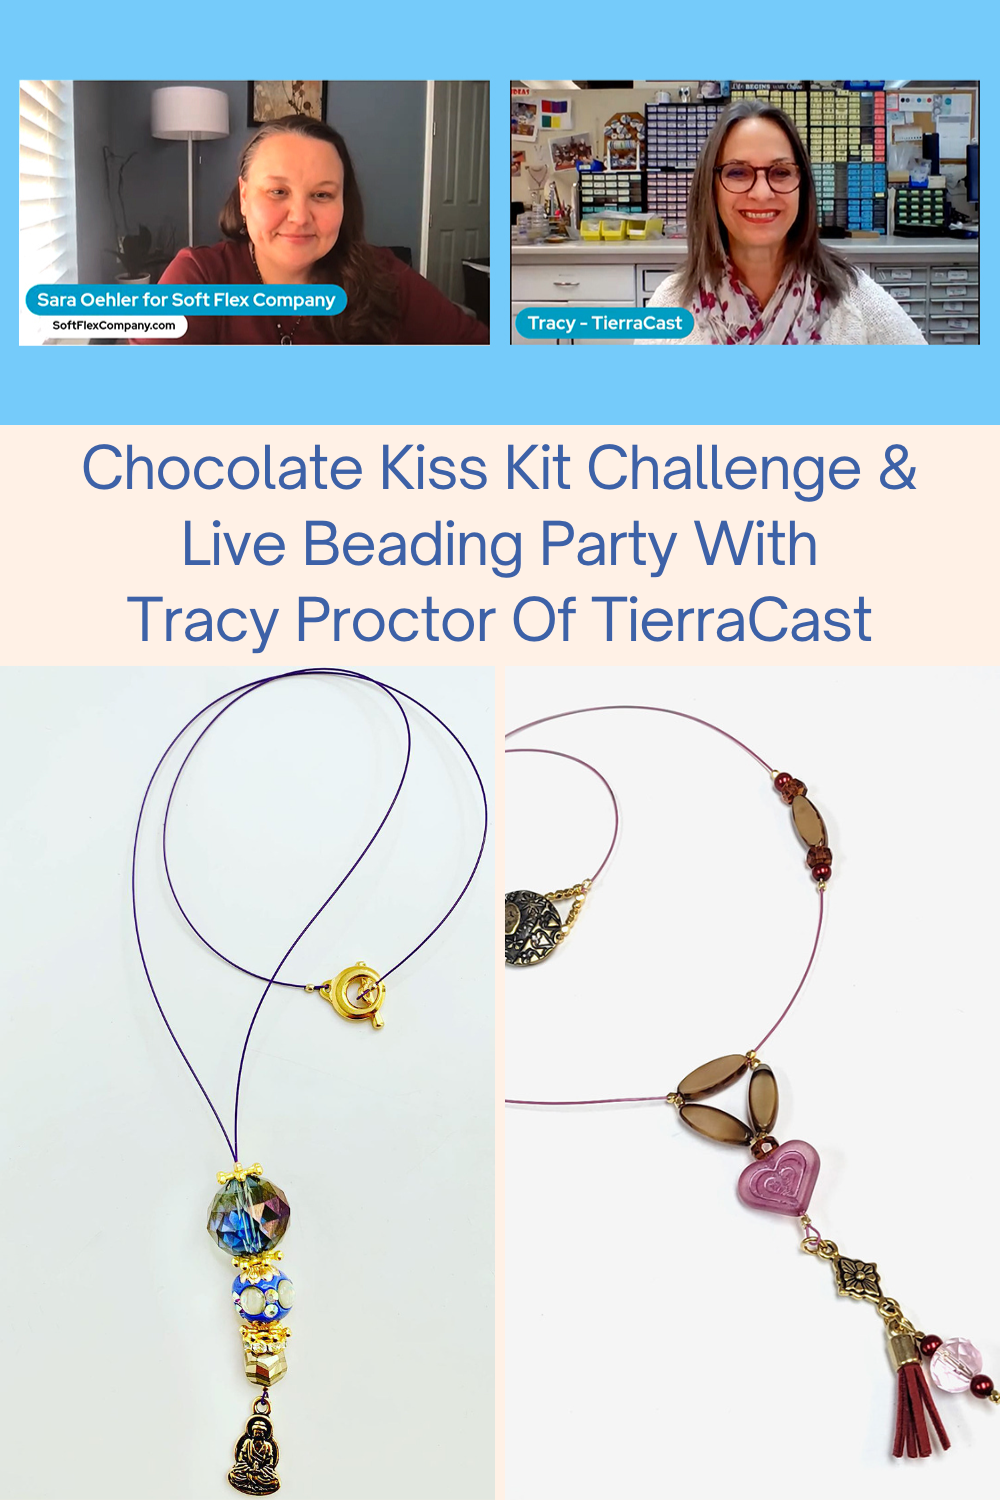 Chocolate Kiss Kit Challenge & Live Beading Party With Tracy Proctor Of TierraCast Collage